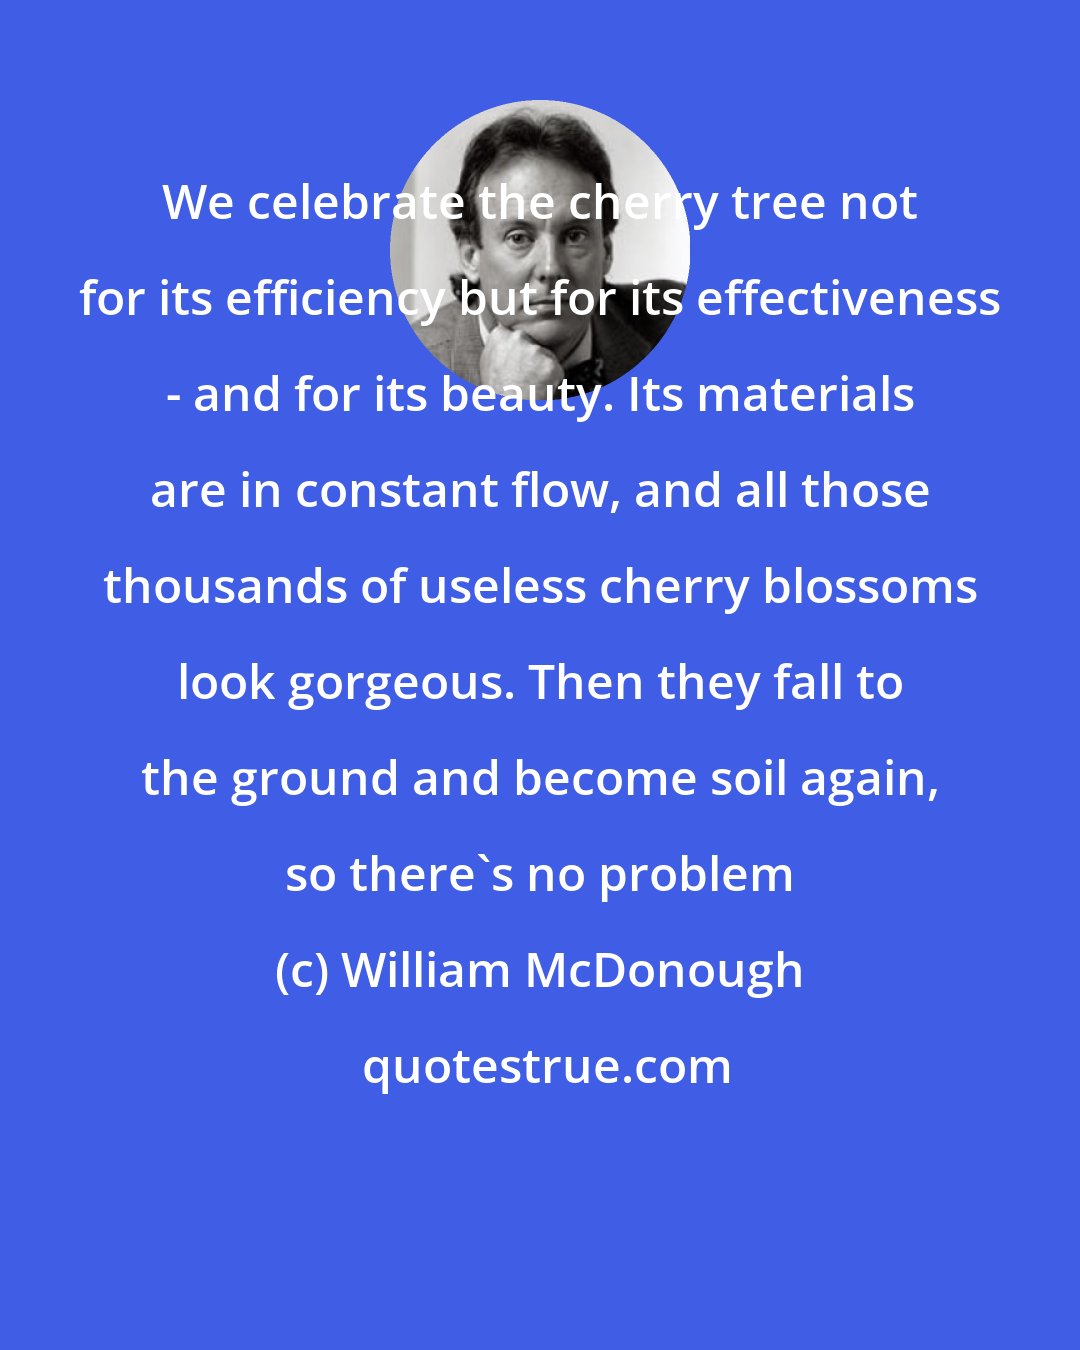 William McDonough: We celebrate the cherry tree not for its efficiency but for its effectiveness - and for its beauty. Its materials are in constant flow, and all those thousands of useless cherry blossoms look gorgeous. Then they fall to the ground and become soil again, so there's no problem